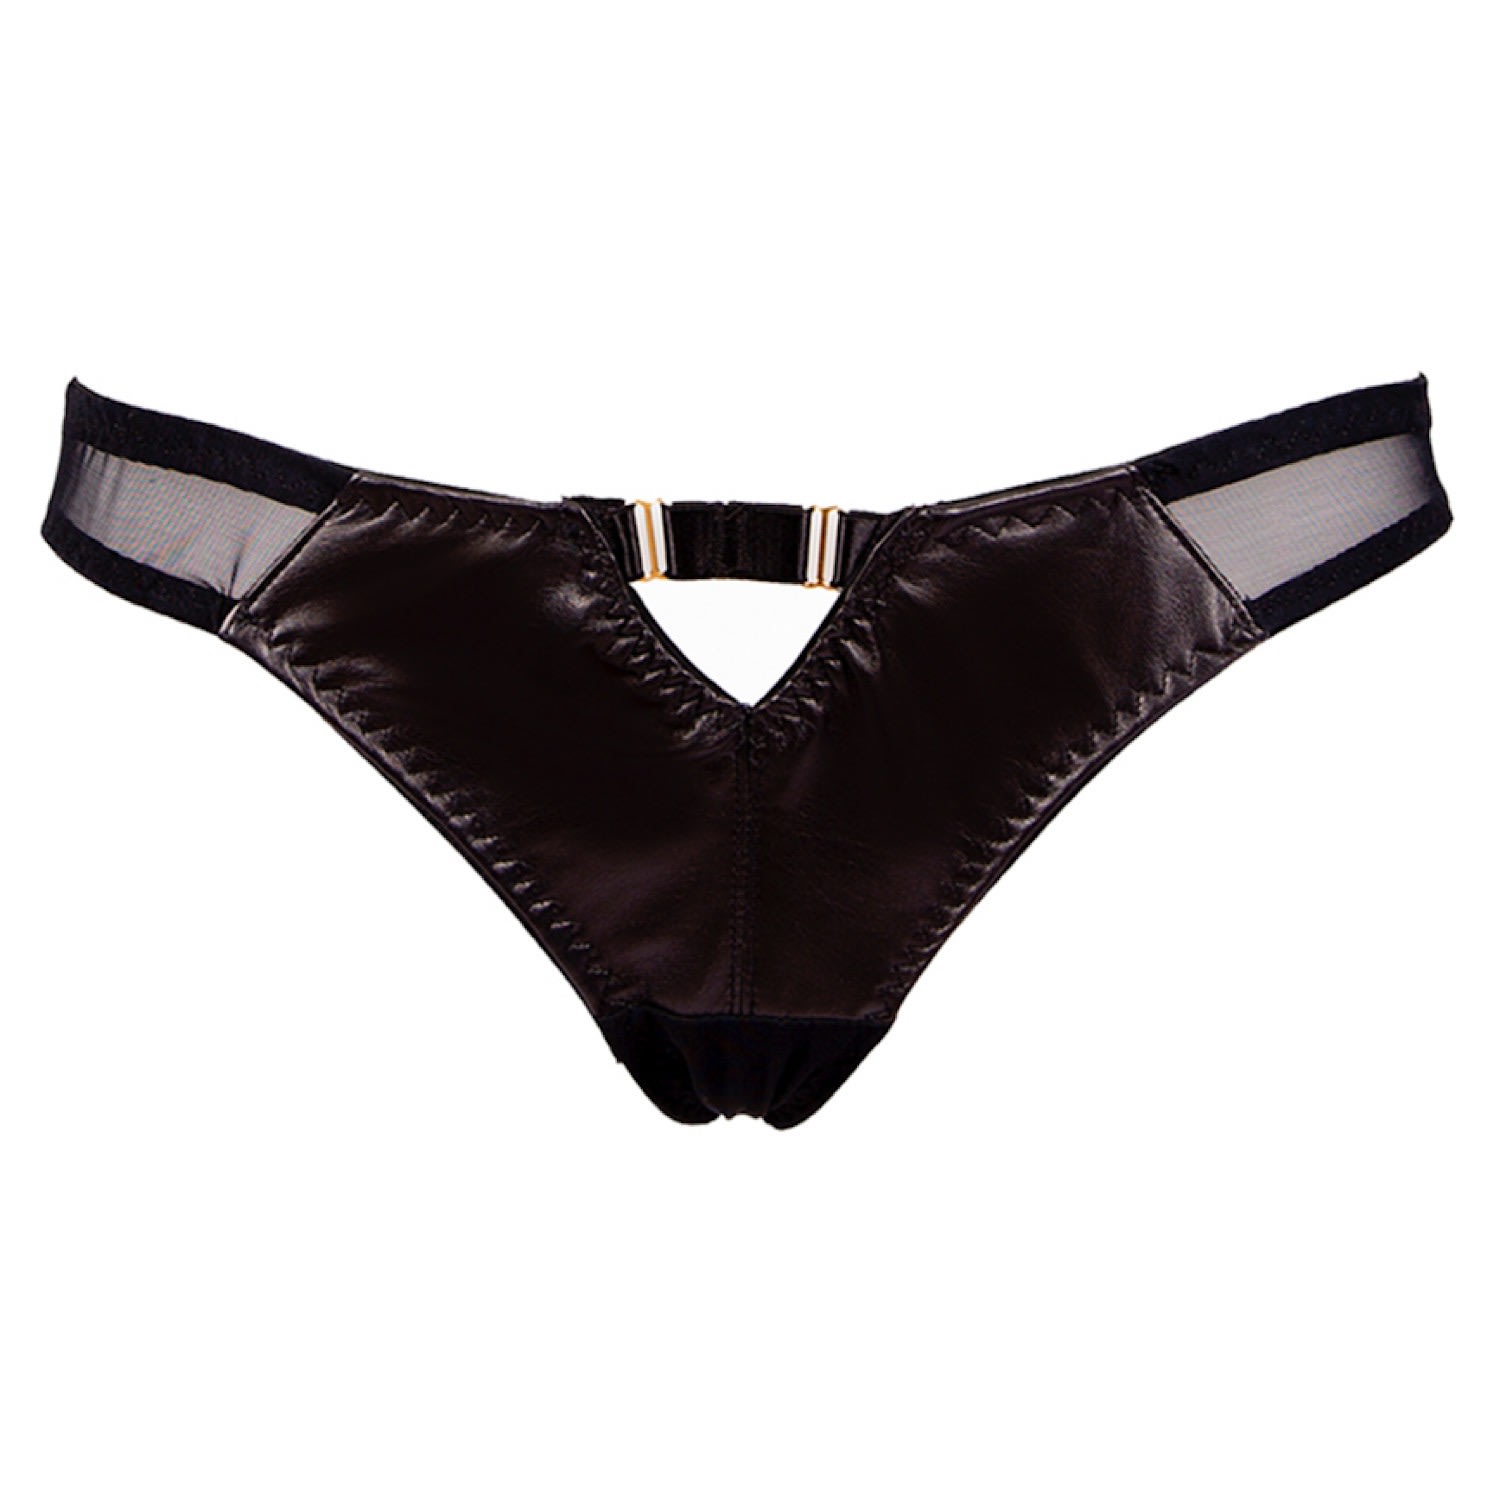 Something Wicked Women's Black Montana Leather Thong Panty Brief